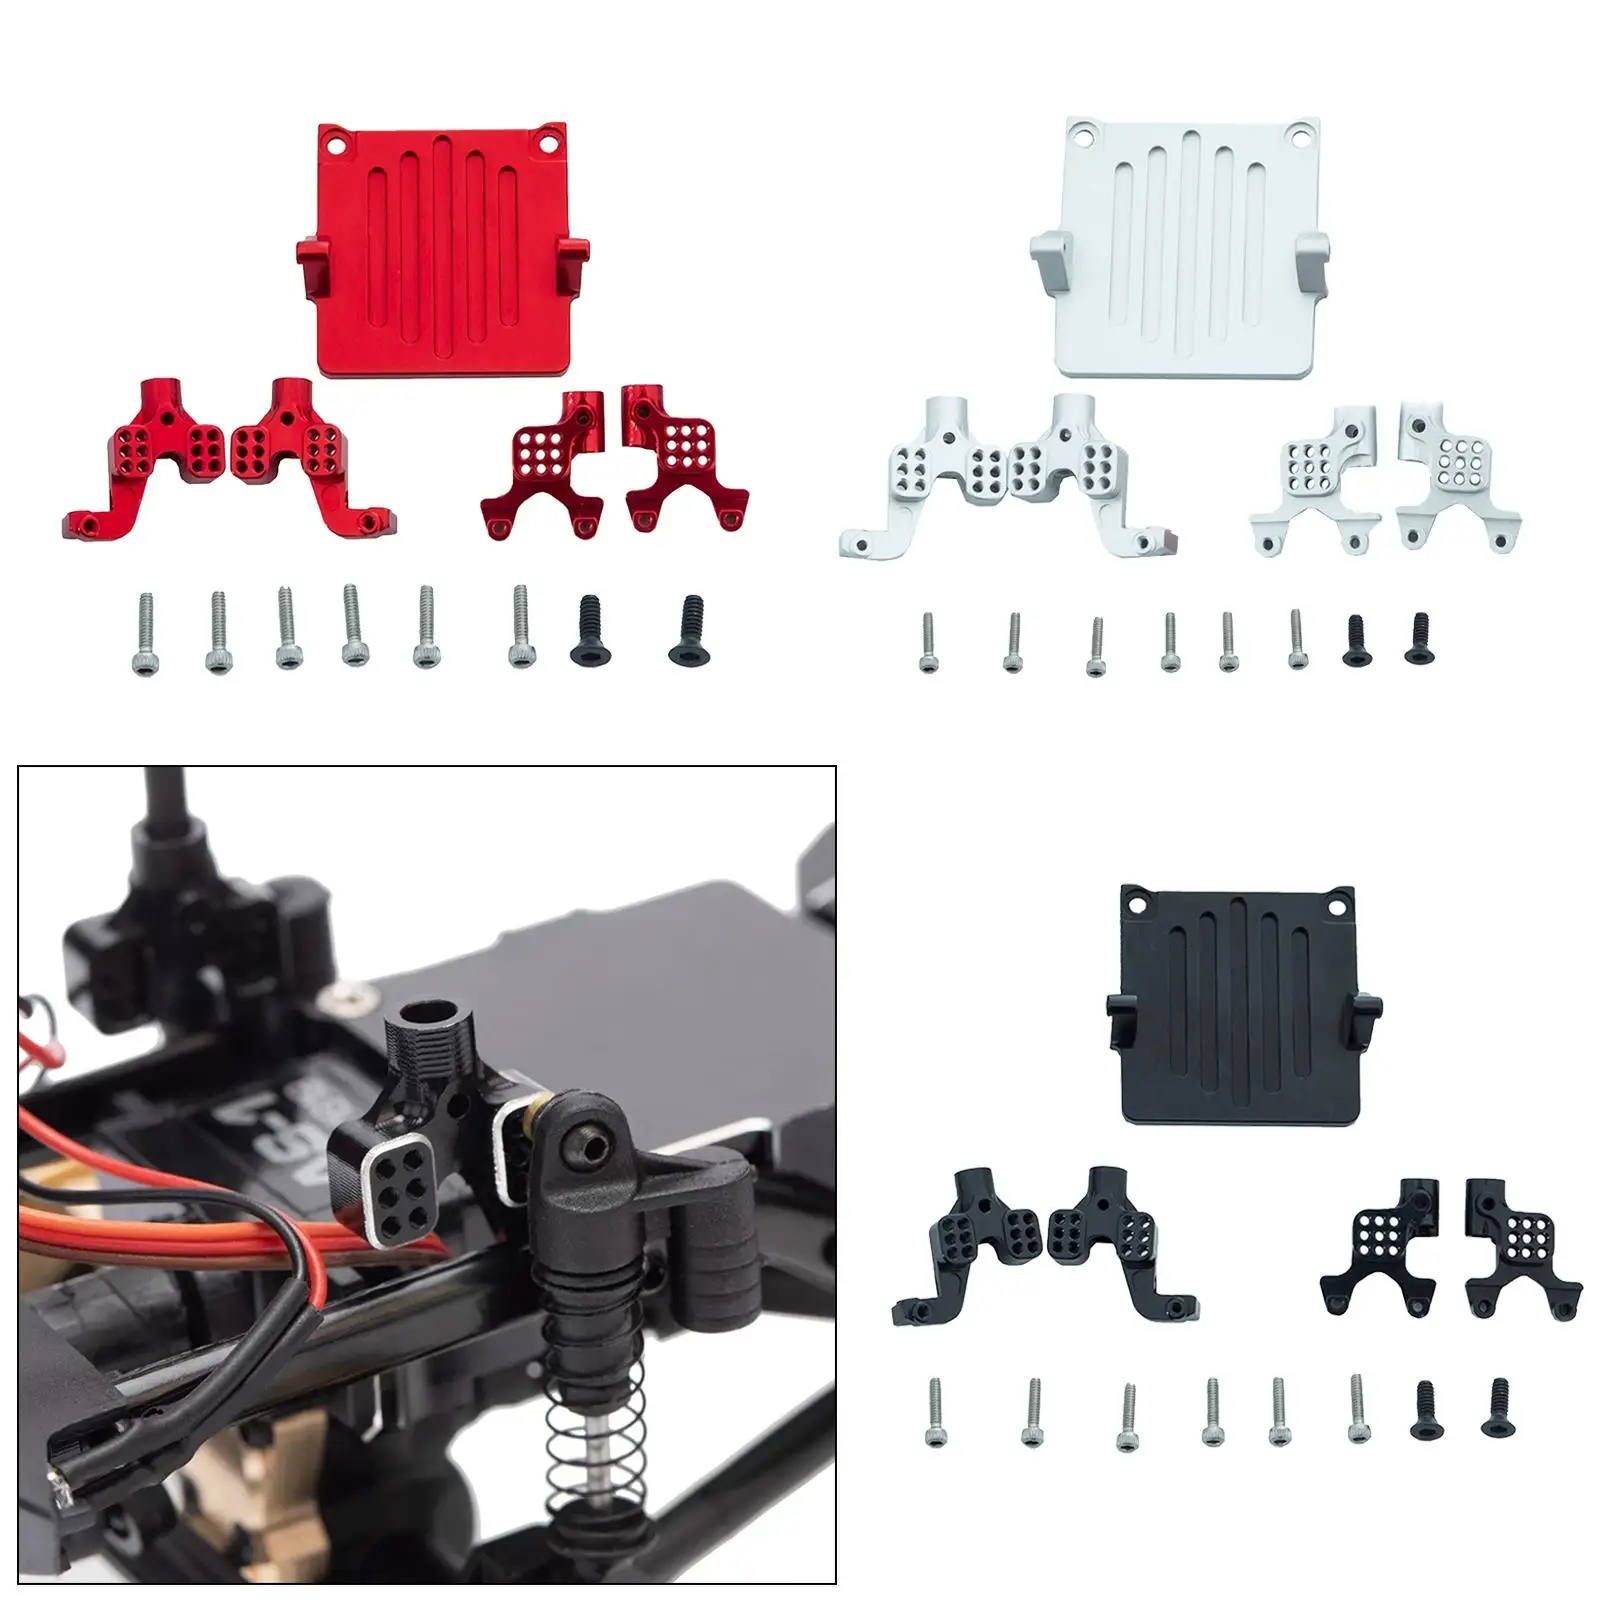 4x 1:24 Scale Remote Control Model Vehicle Aluminum Alloy Shock Damper Towers for Axial SCX24 AXI00001 Car Upgrade Parts